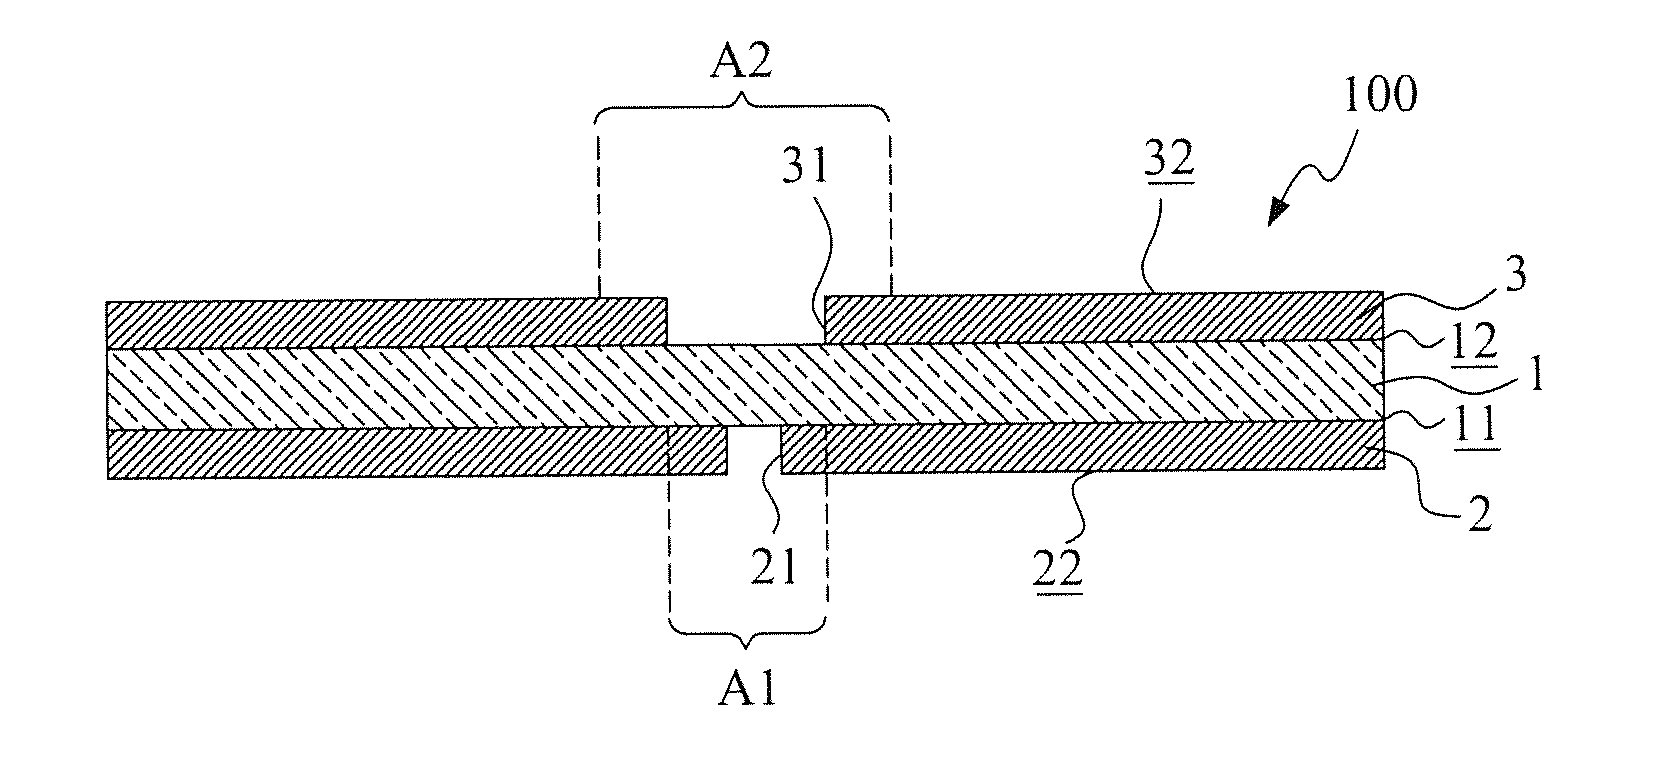 Microvia structure of flexible circuit board and manufacturing method thereof